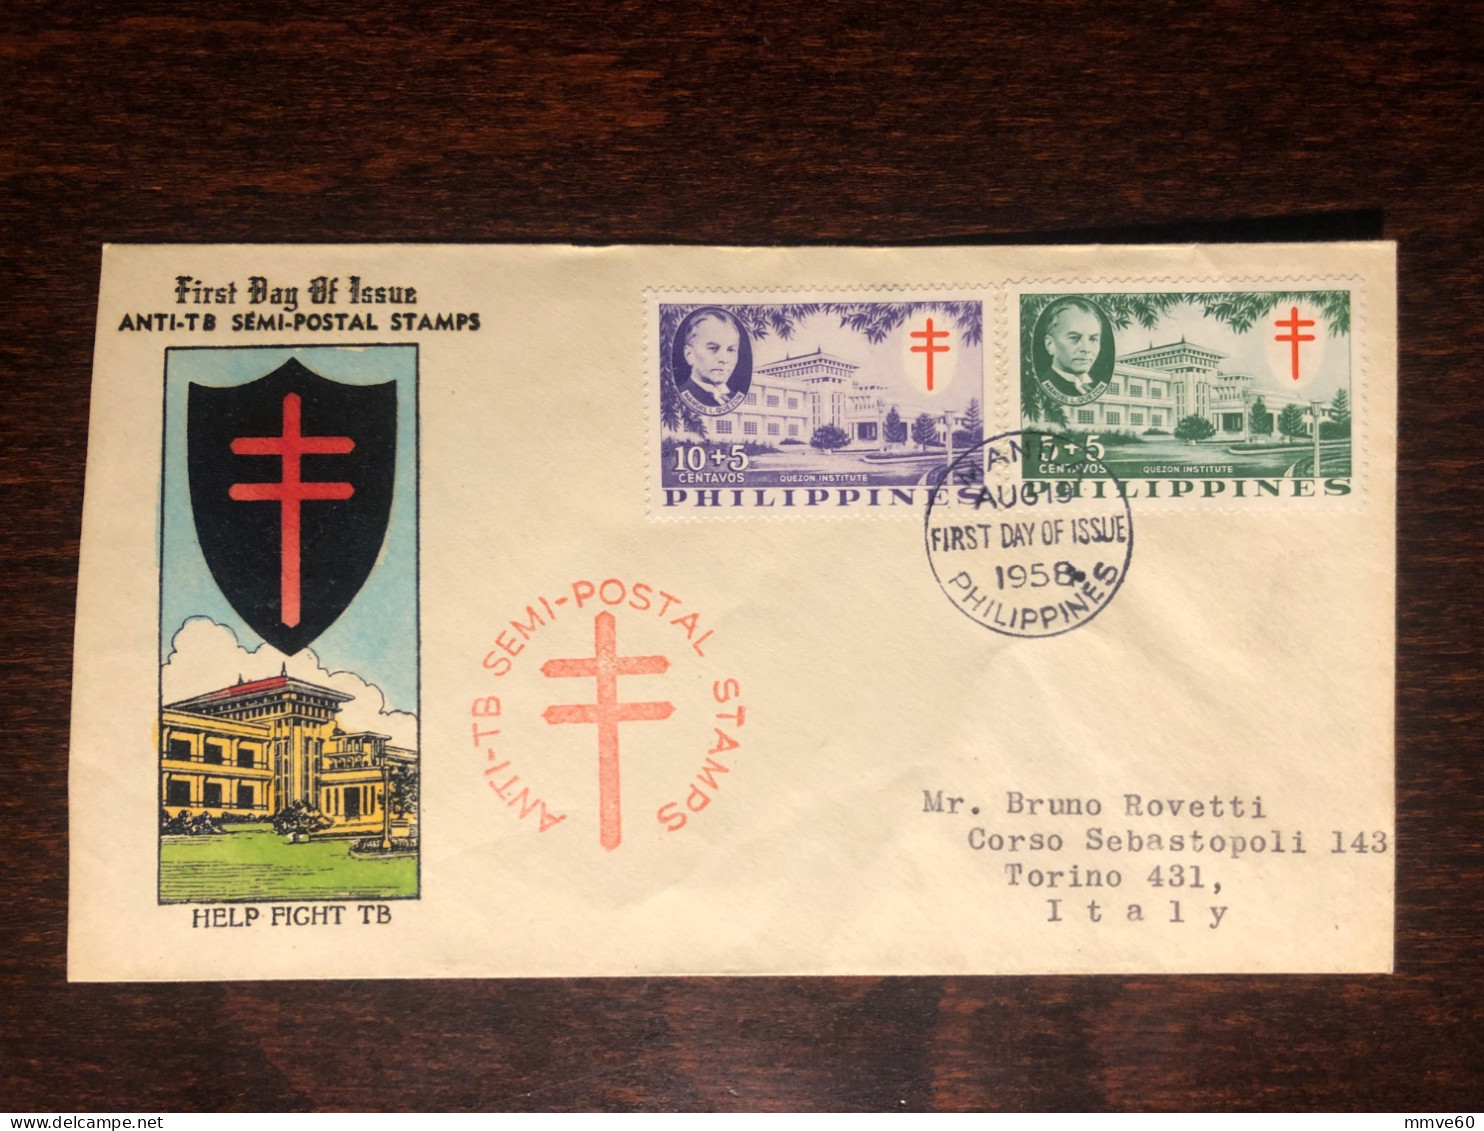 PHILIPPINES FDC COVER 1958 YEAR TUBERCULOSIS TB HEALTH MEDICINE STAMPS - Philippines